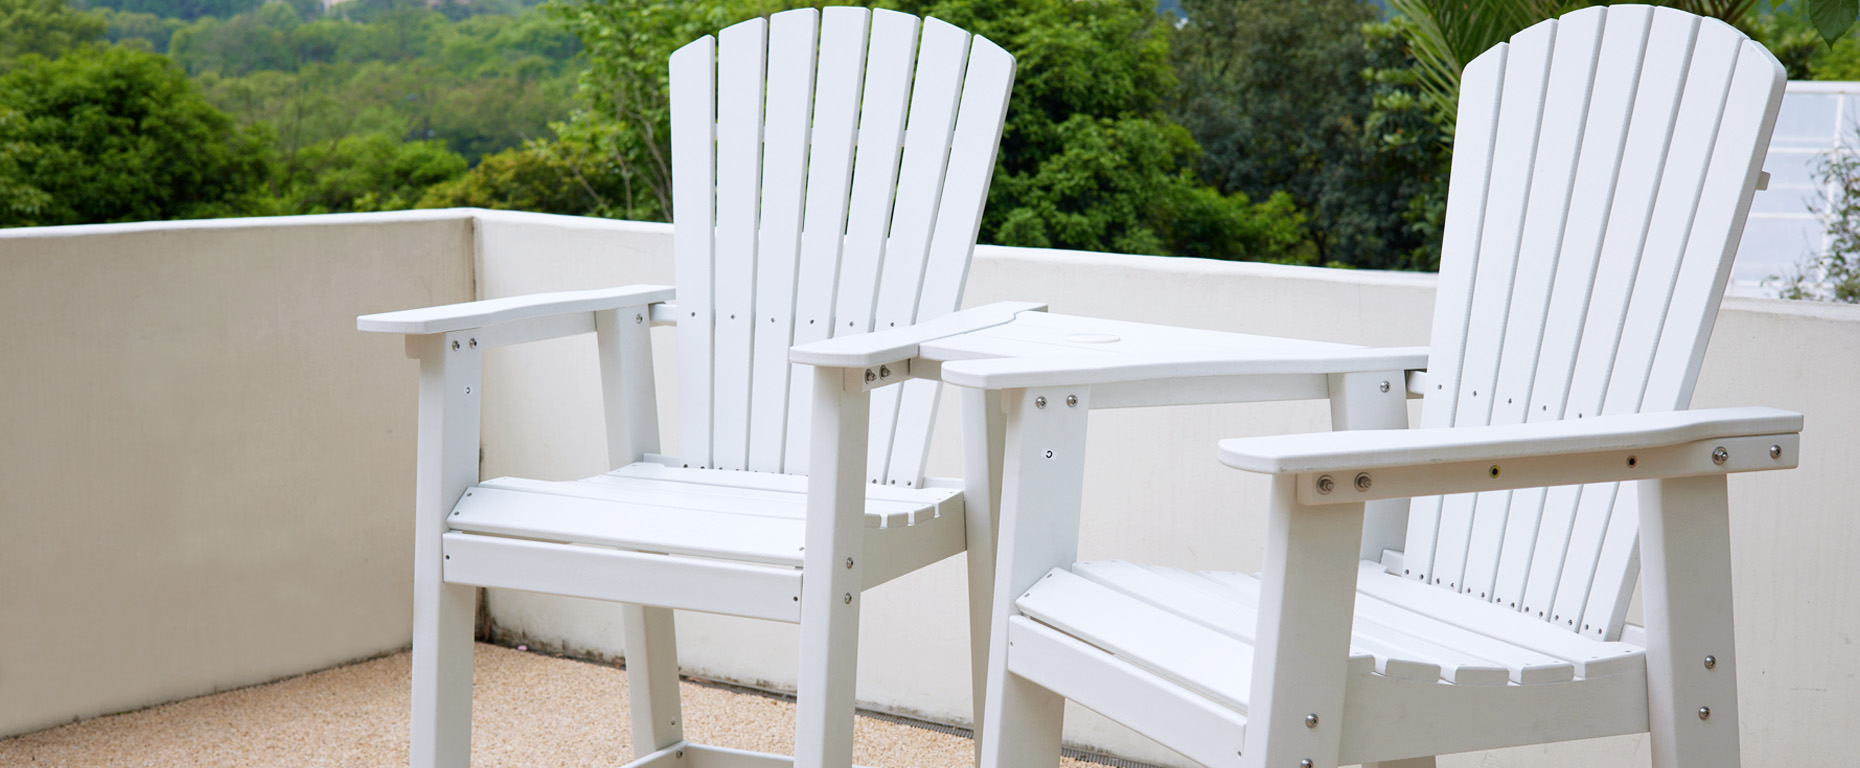 Outdoor Bar Furniture Buying Guide